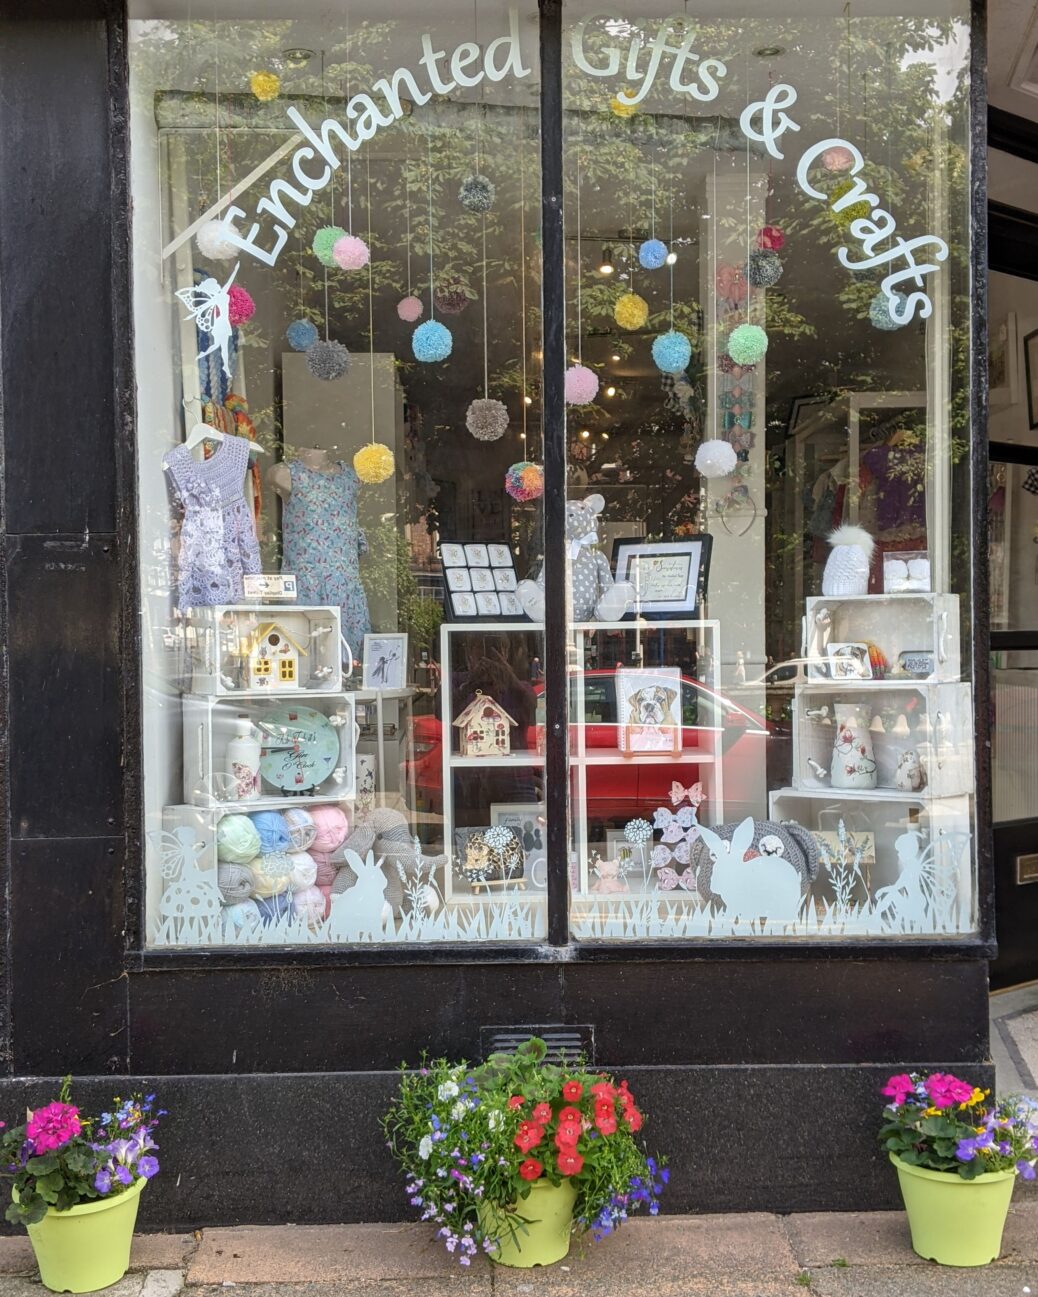 Enchanted Gifts and Crafts has opened at 54 Lord Street in Southport